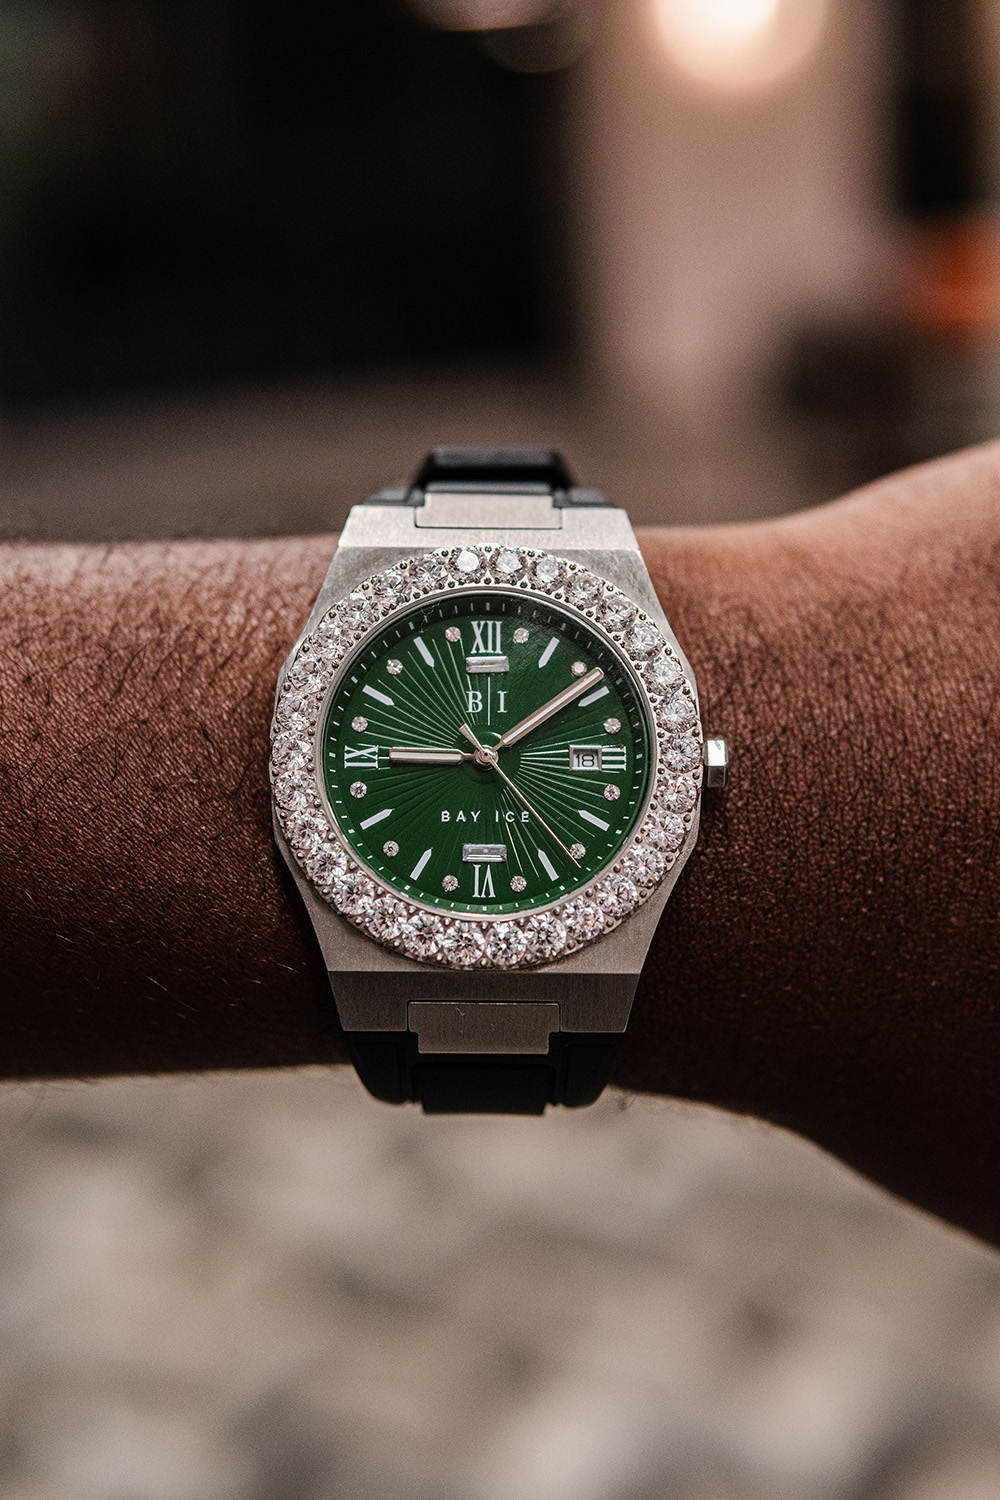 Bay Ice Is Gaining Ground as One of the Most Popular Black-Owned Wristwatch Brand